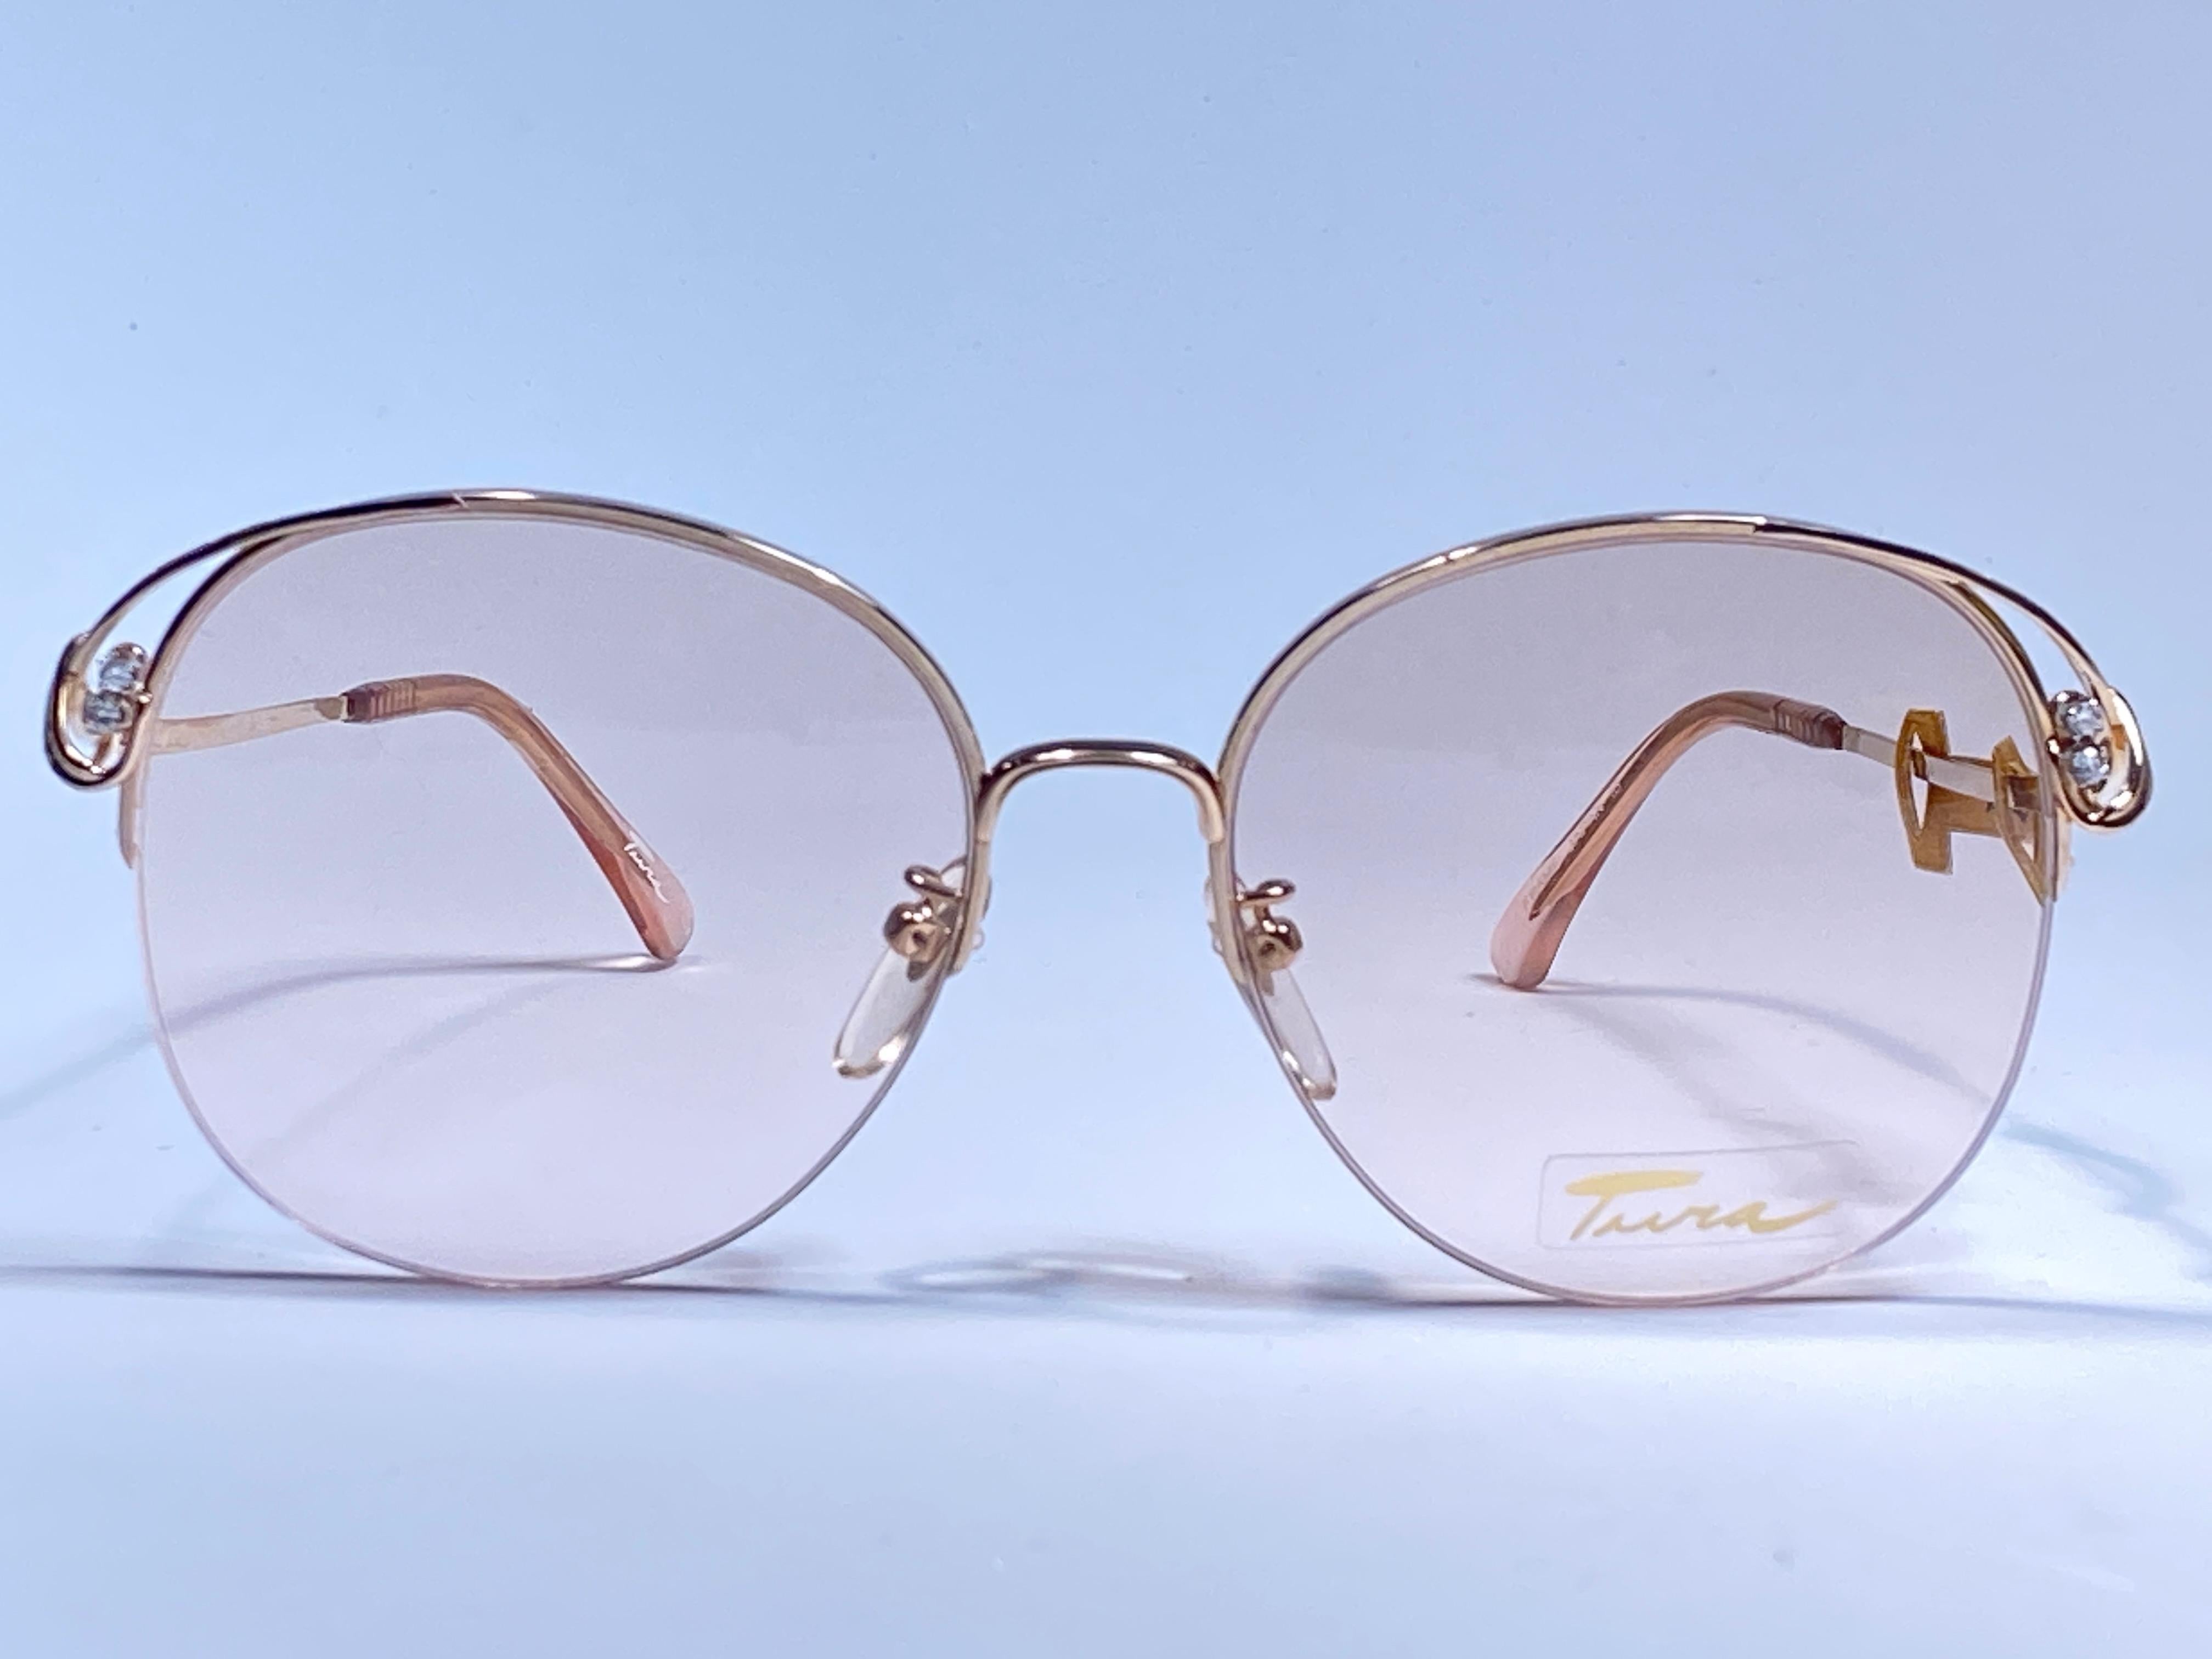 Tura 12K gold filled with clear rhinestones sunglasses circa 1970's. Half Frame with RX lenses.

This is a seldom and rare piece not only for its aesthetic value but for its importance in the sunglasses and fashion history.   

Please notice this